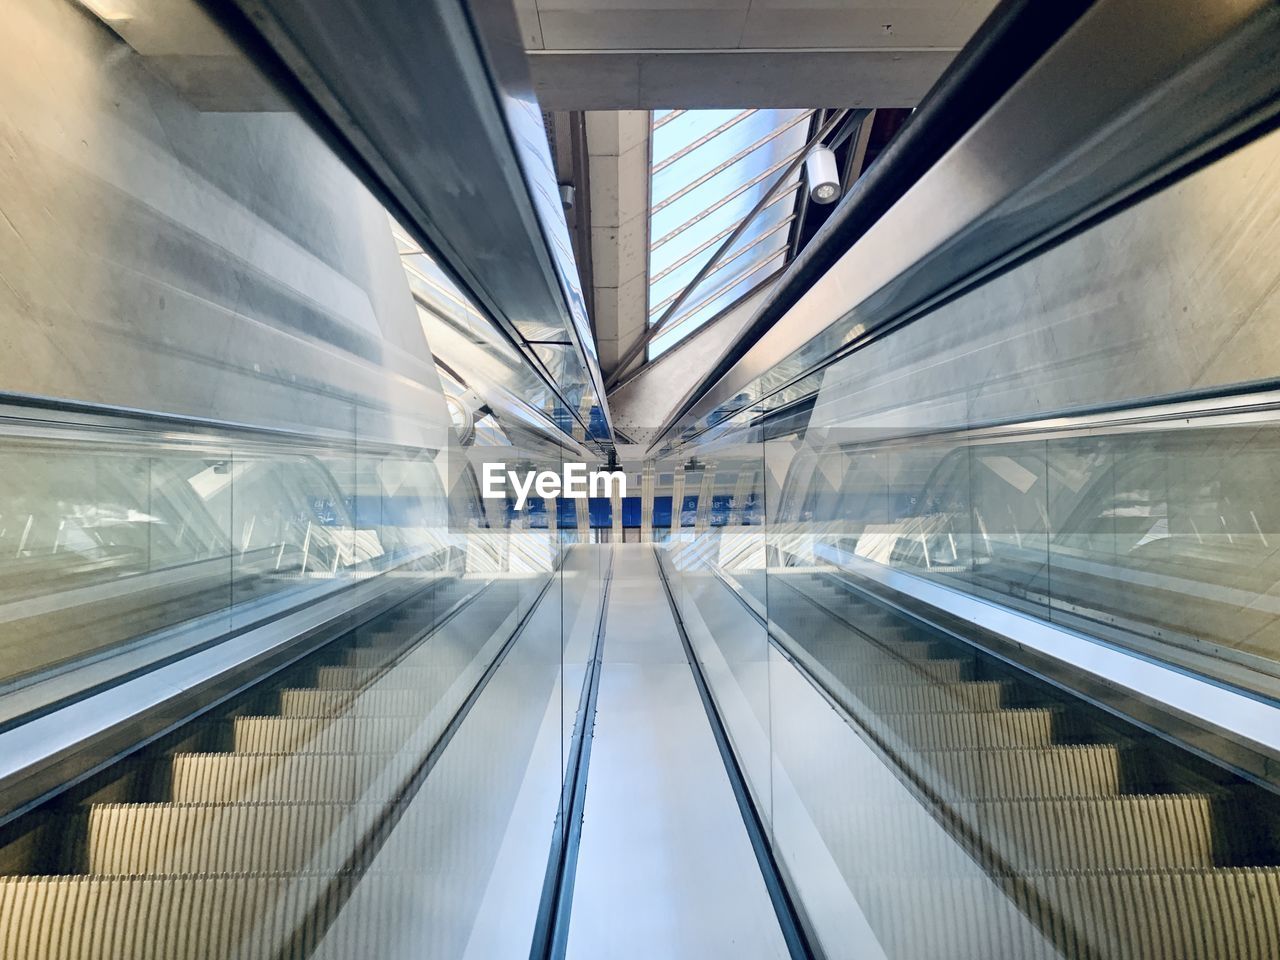 LOW ANGLE VIEW OF ESCALATOR IN AIRPORT